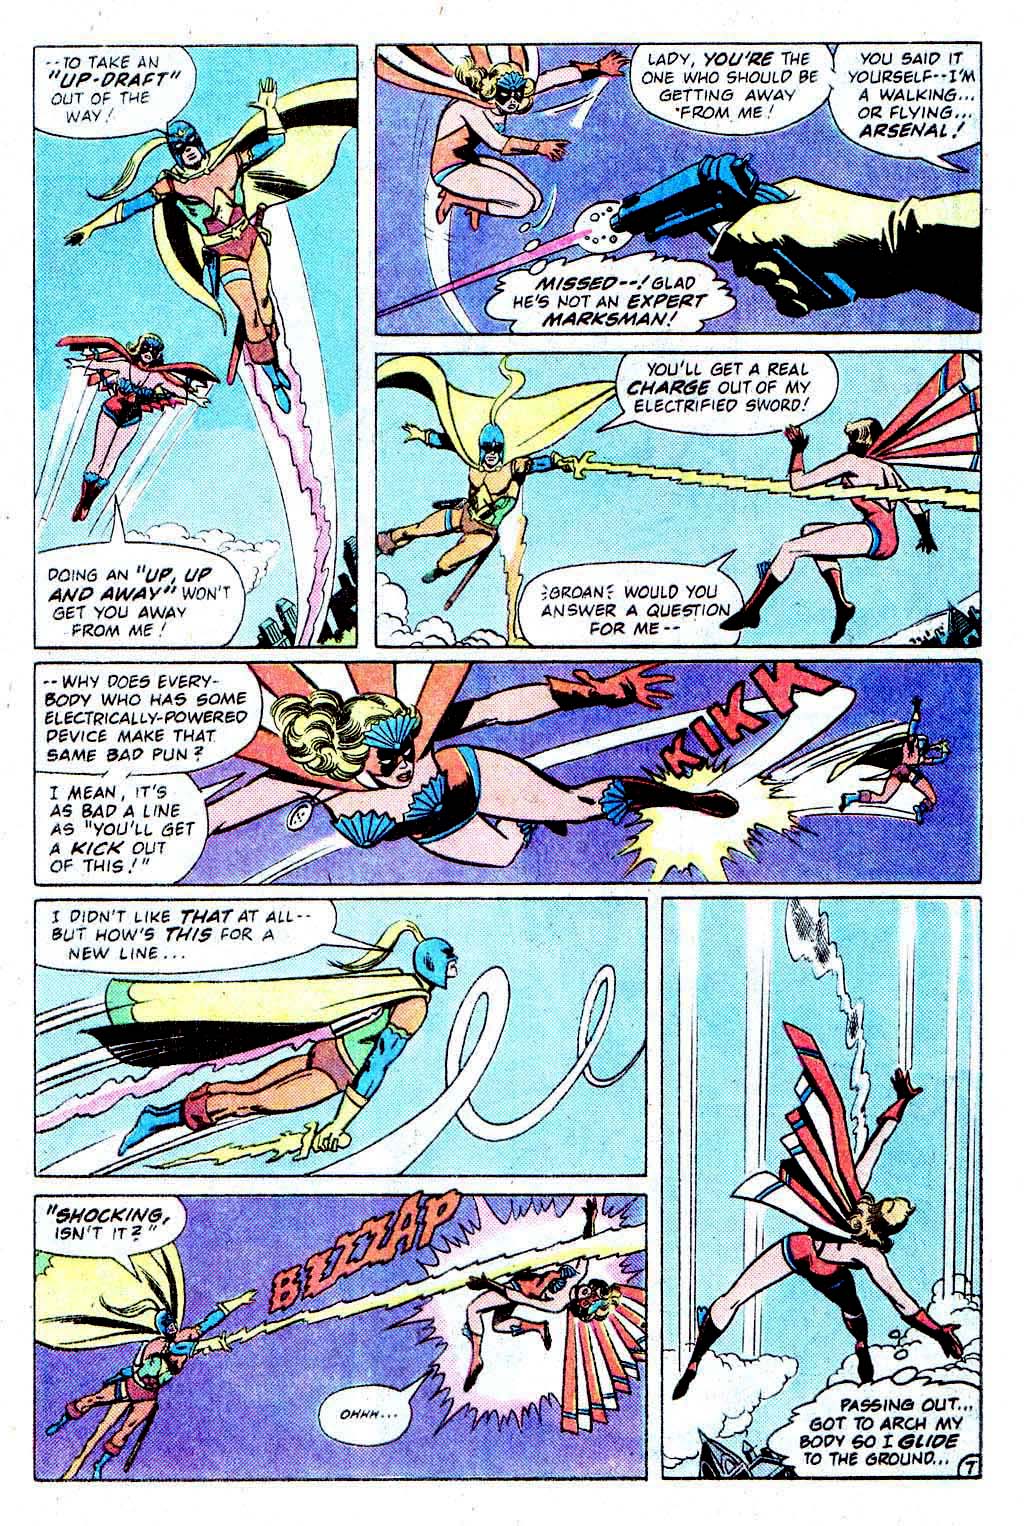 The New Adventures of Superboy 35 Page 48